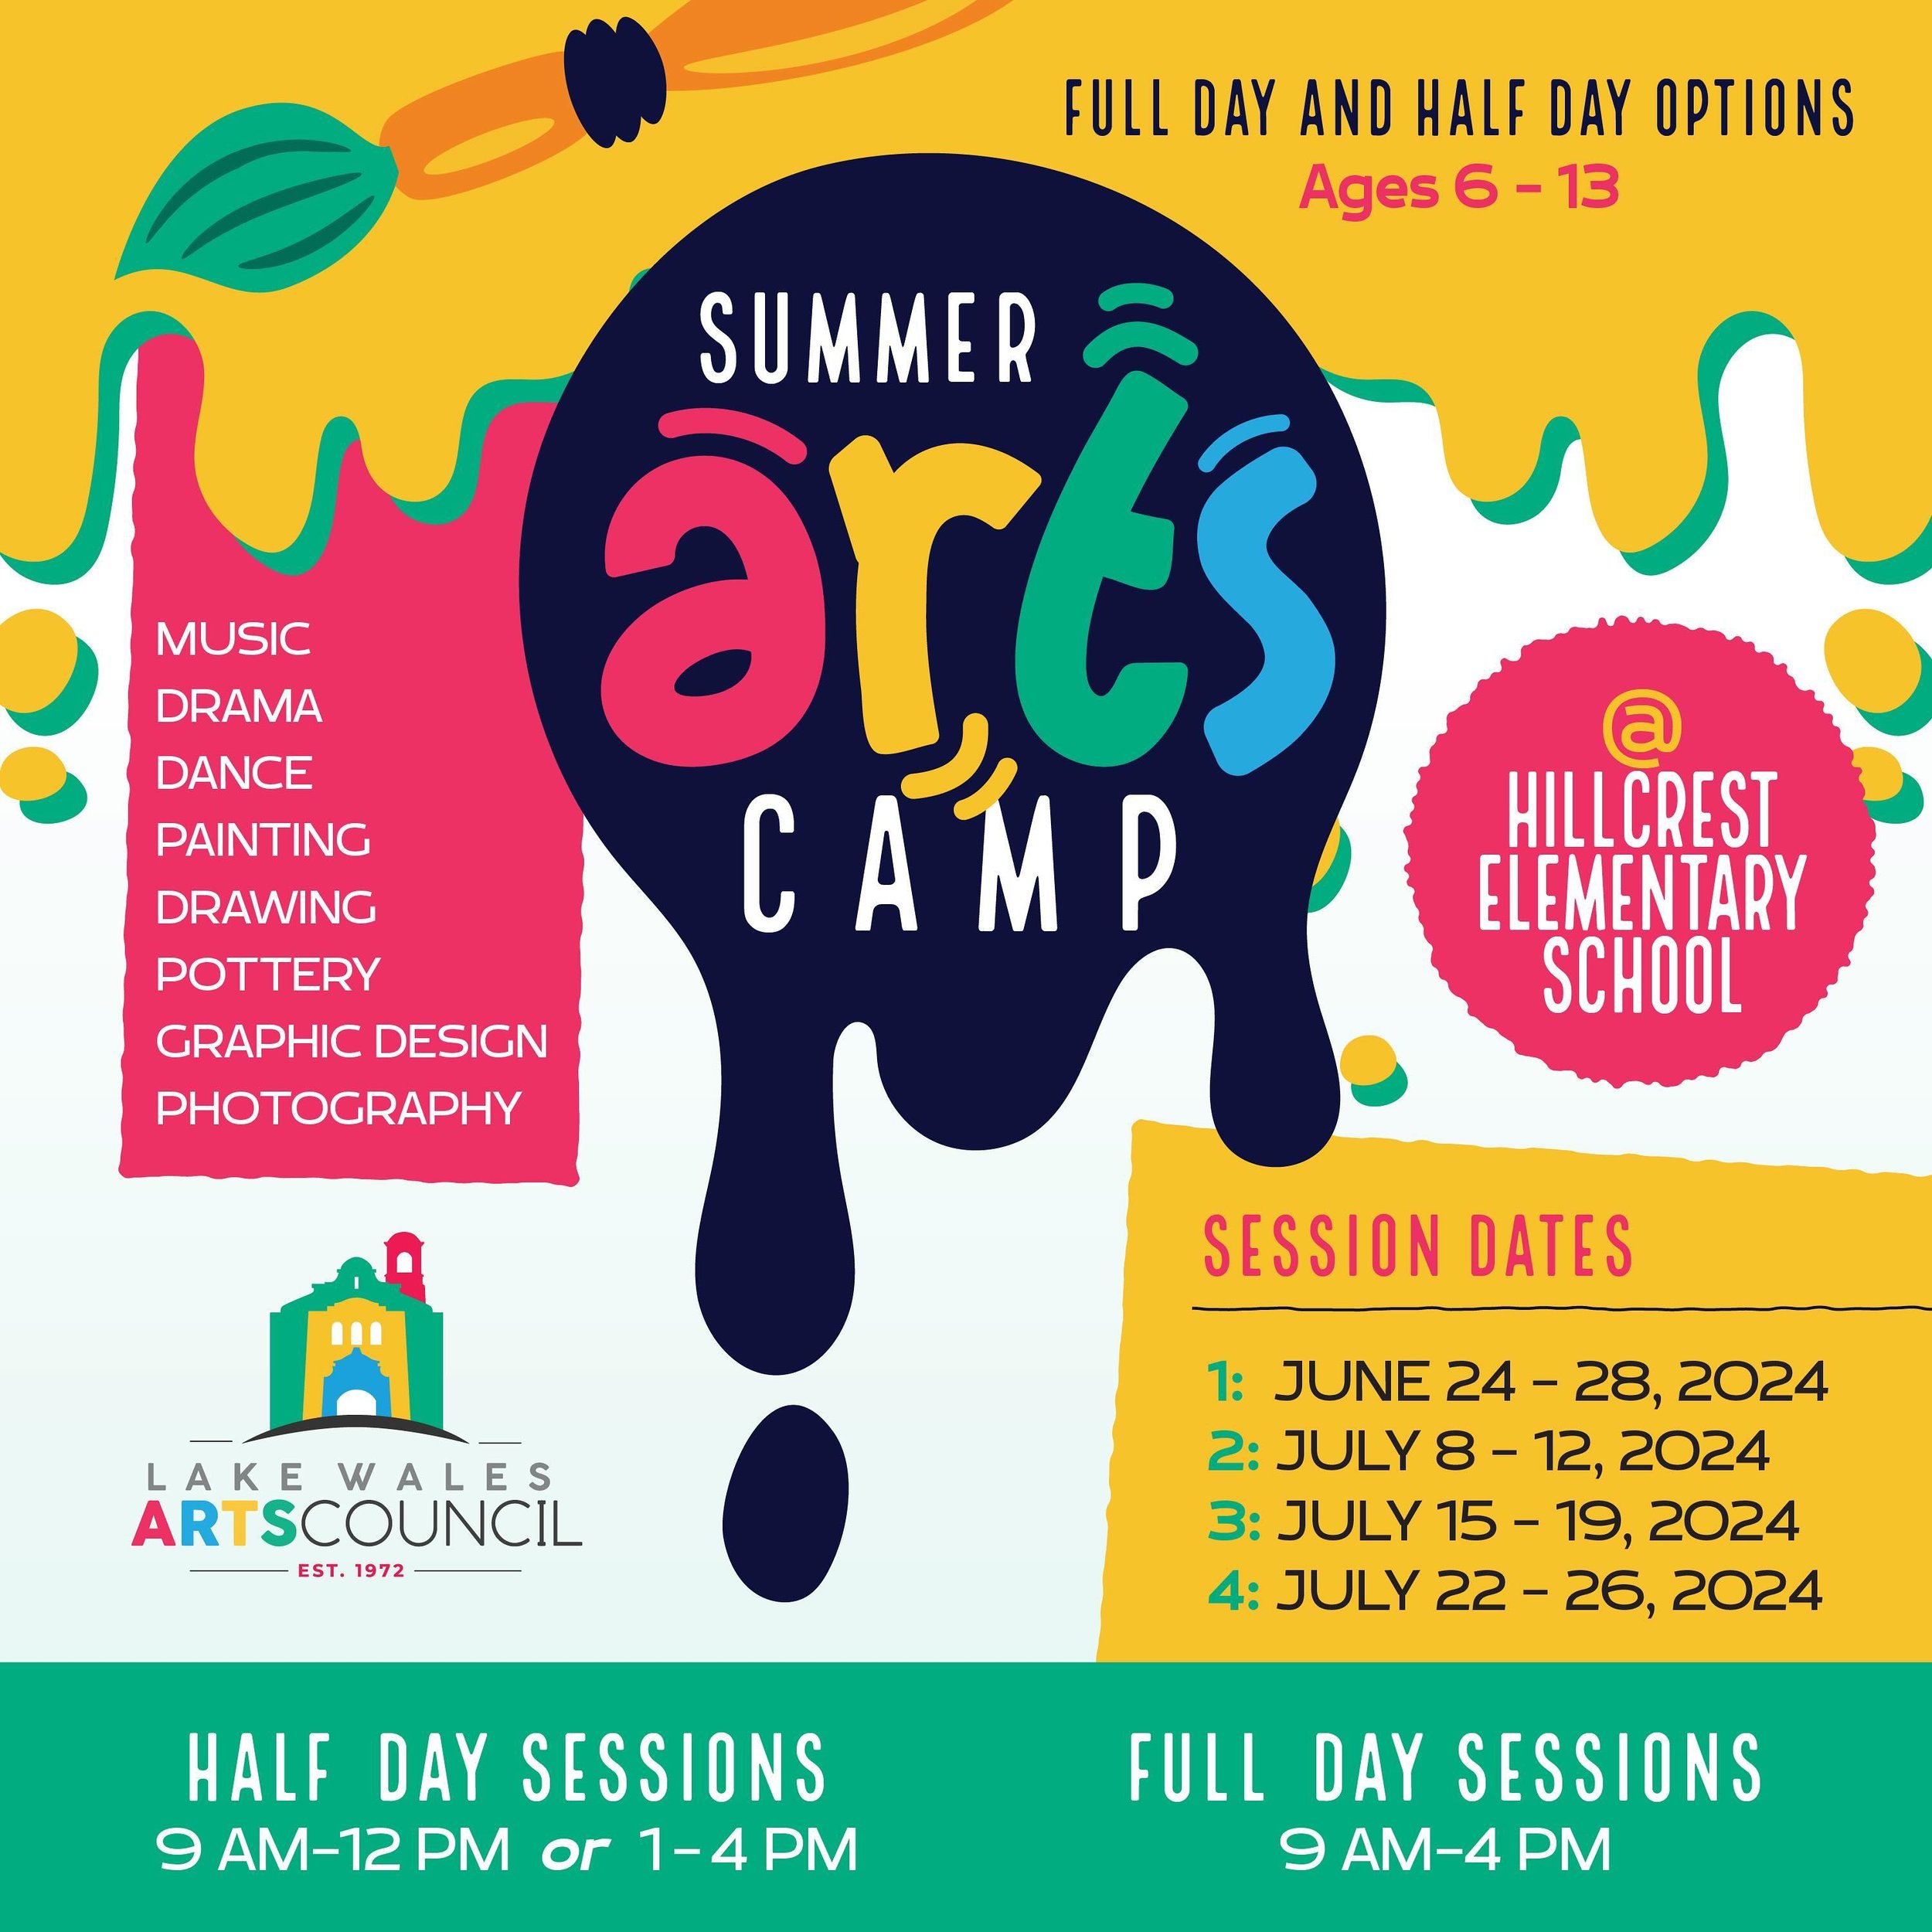 🎨 We look forward to hosting another successful year of Summer Arts Campa with the  @hillcrestelementaryhawks! Registration and scholarship details are now available on our website at LW-arts.org.